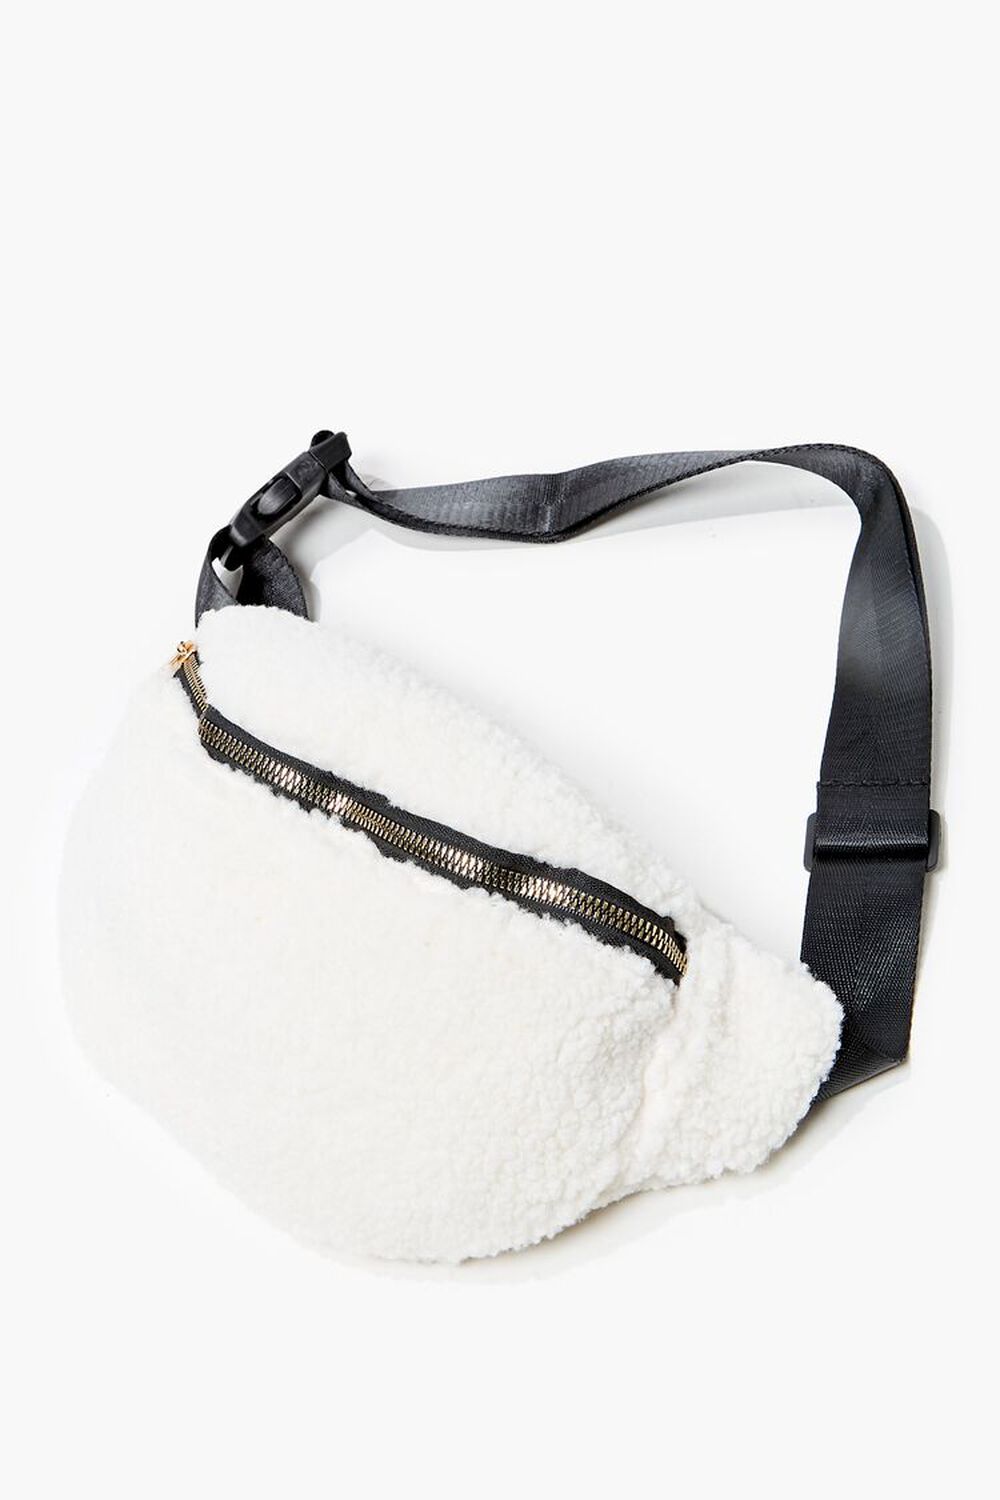 CREAM Faux Shearling Fanny Pack, image 1